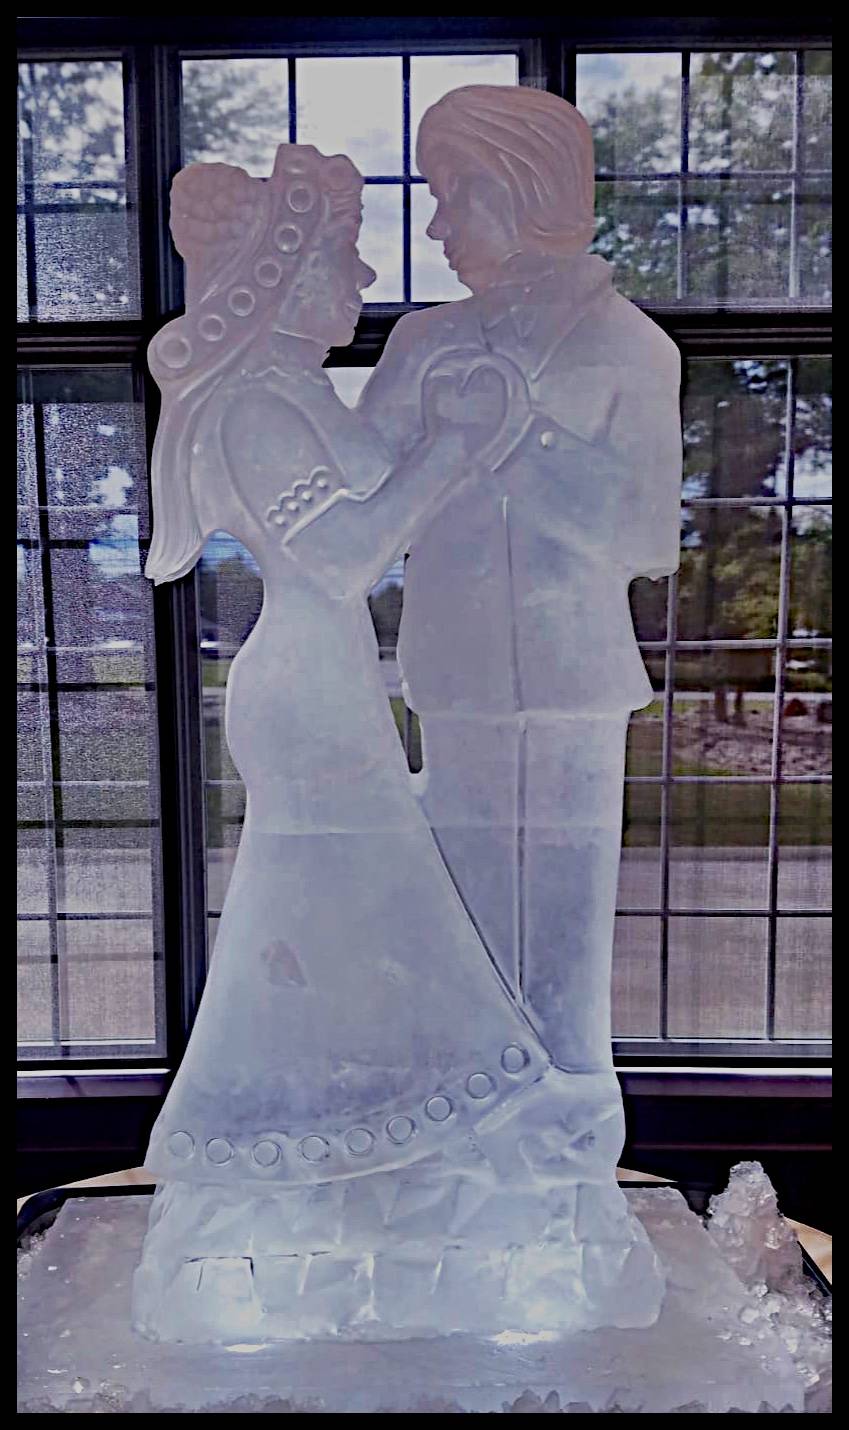 Wedding ice sculpture molds - general for sale - by owner - craigslist